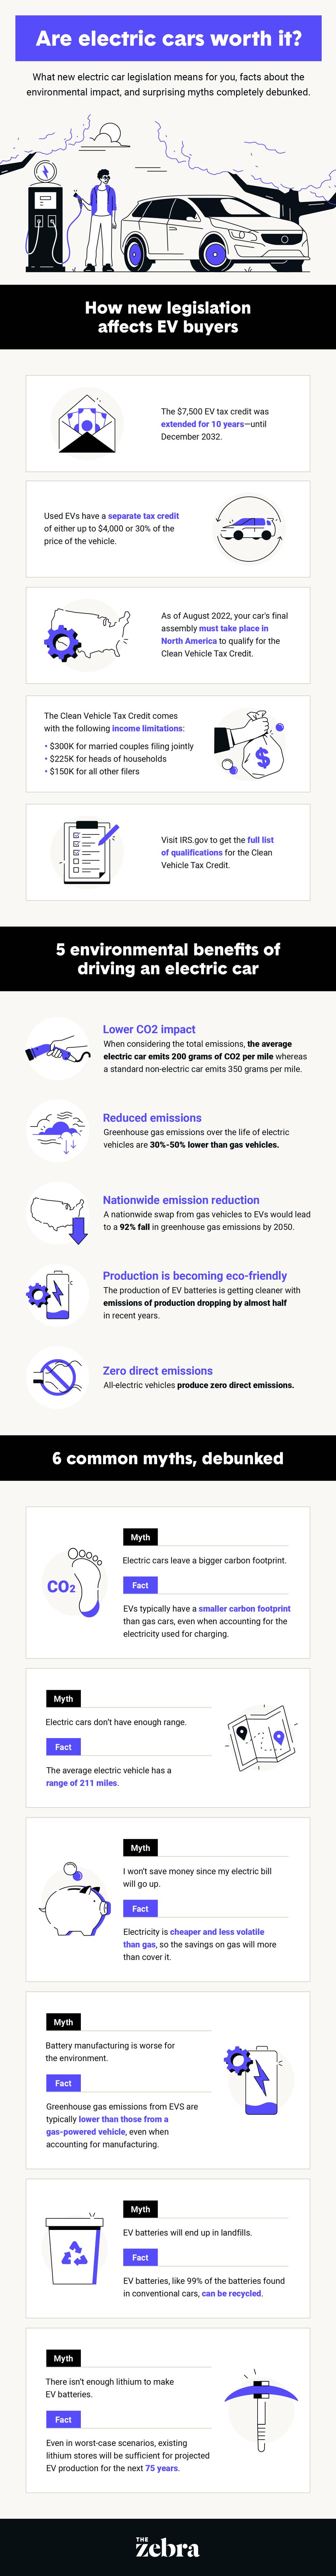 infographic about the benefits of electric vehicles